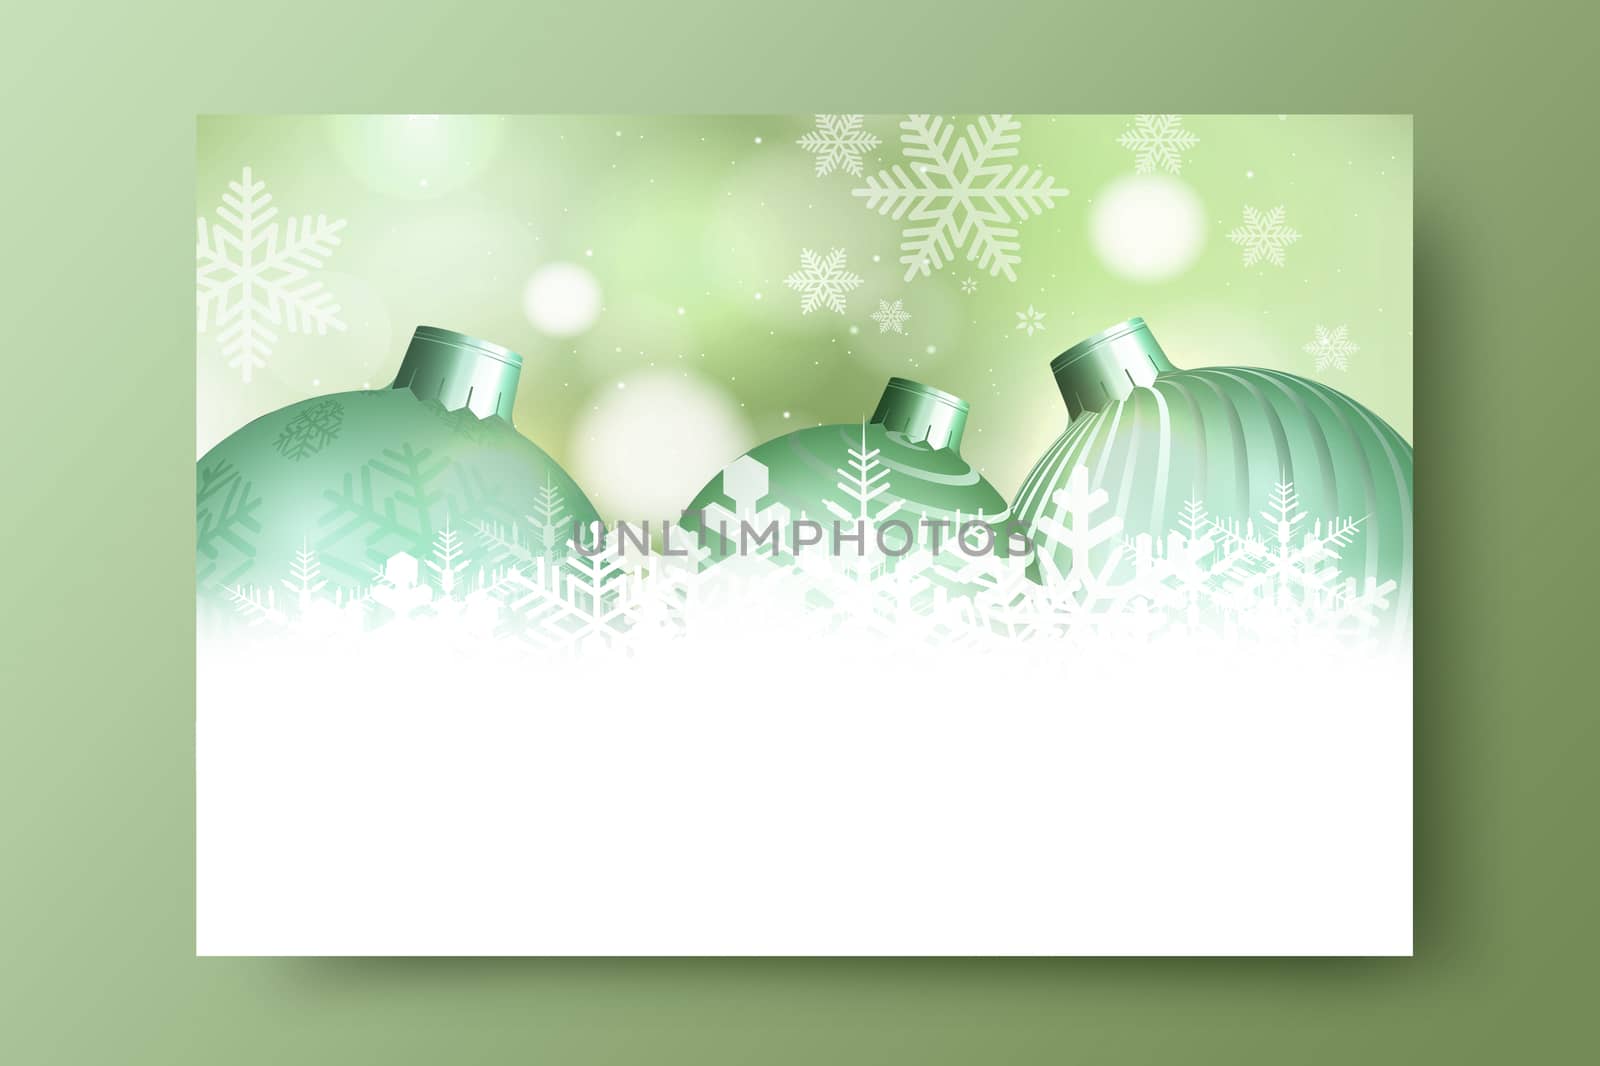 The Christmas ball decoration, snowflake and green bokeh background